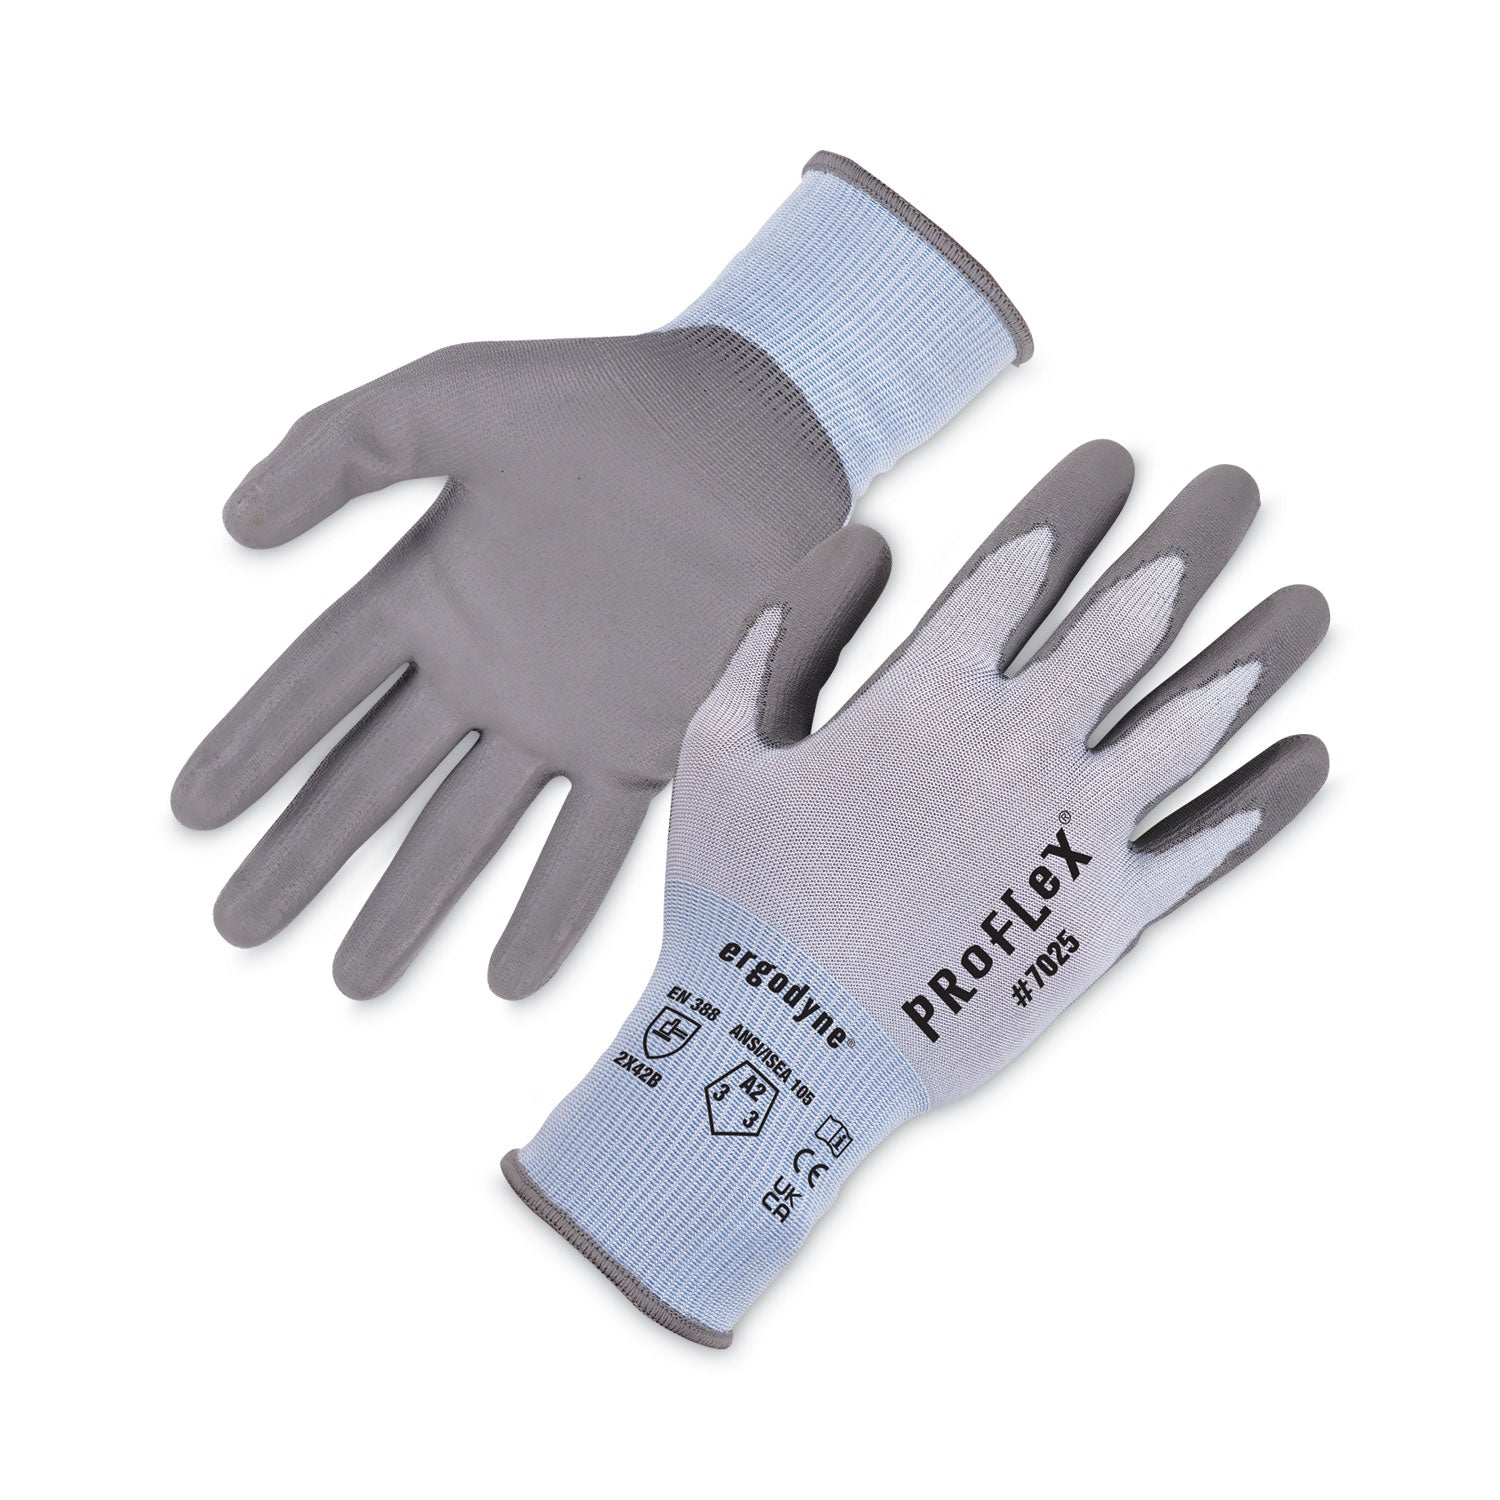 proflex-7025-ansi-a2-pu-coated-cr-gloves-blue-large-pair-ships-in-1-3-business-days_ego10434 - 1